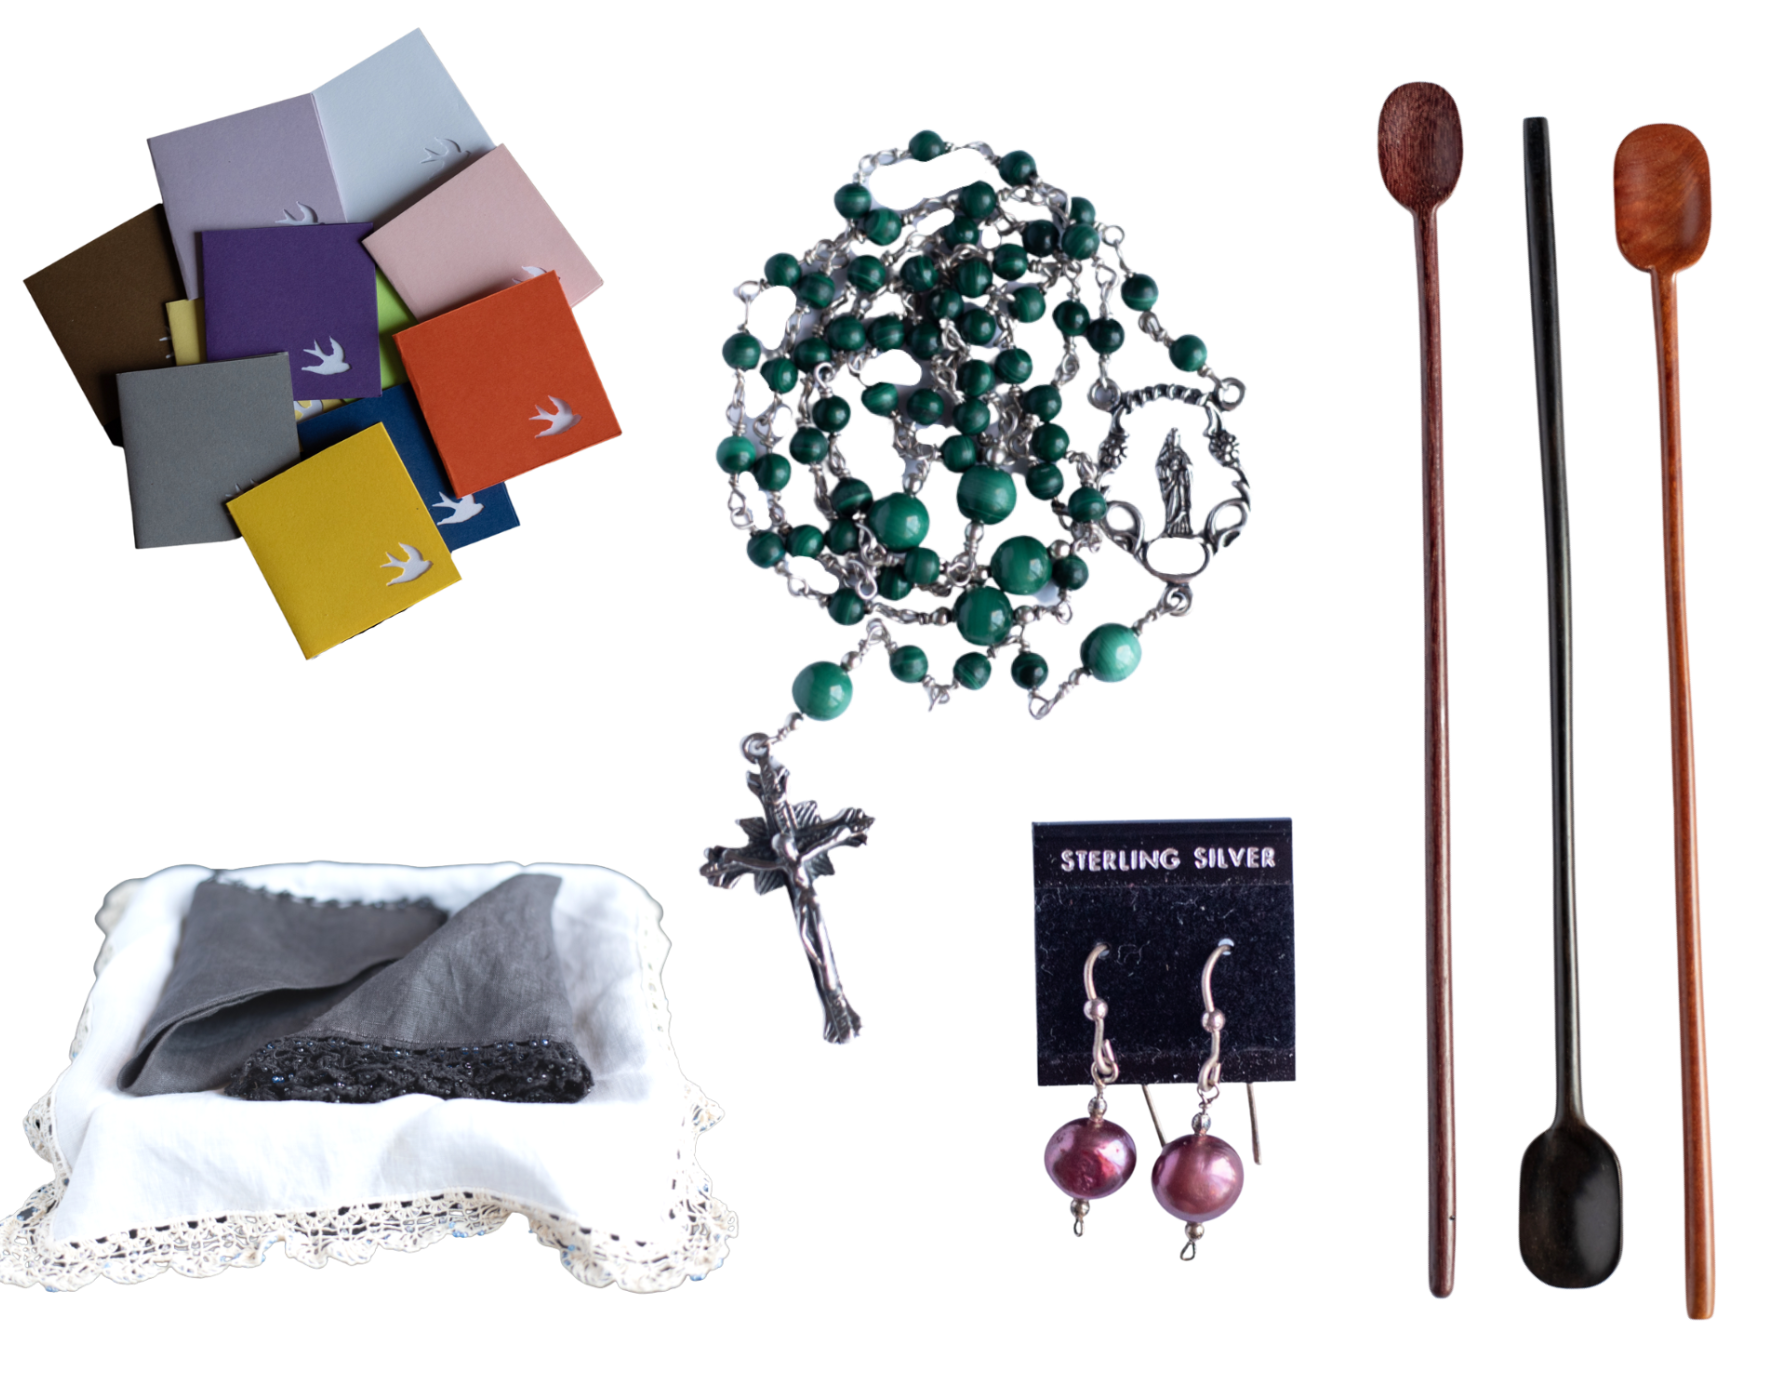 The photo shows several two inch by two inch linen lined note cards with a flying dove punched out, a coiled malachite and sterling rosary, black and white linen hand laced handkerchiefs. a pair of sterling and burgundy pearl earrings on an a black earring card and three polished long wooden teaspoons in purple heart, ebony and pink ivory woods. arranged on a gray gingham background.